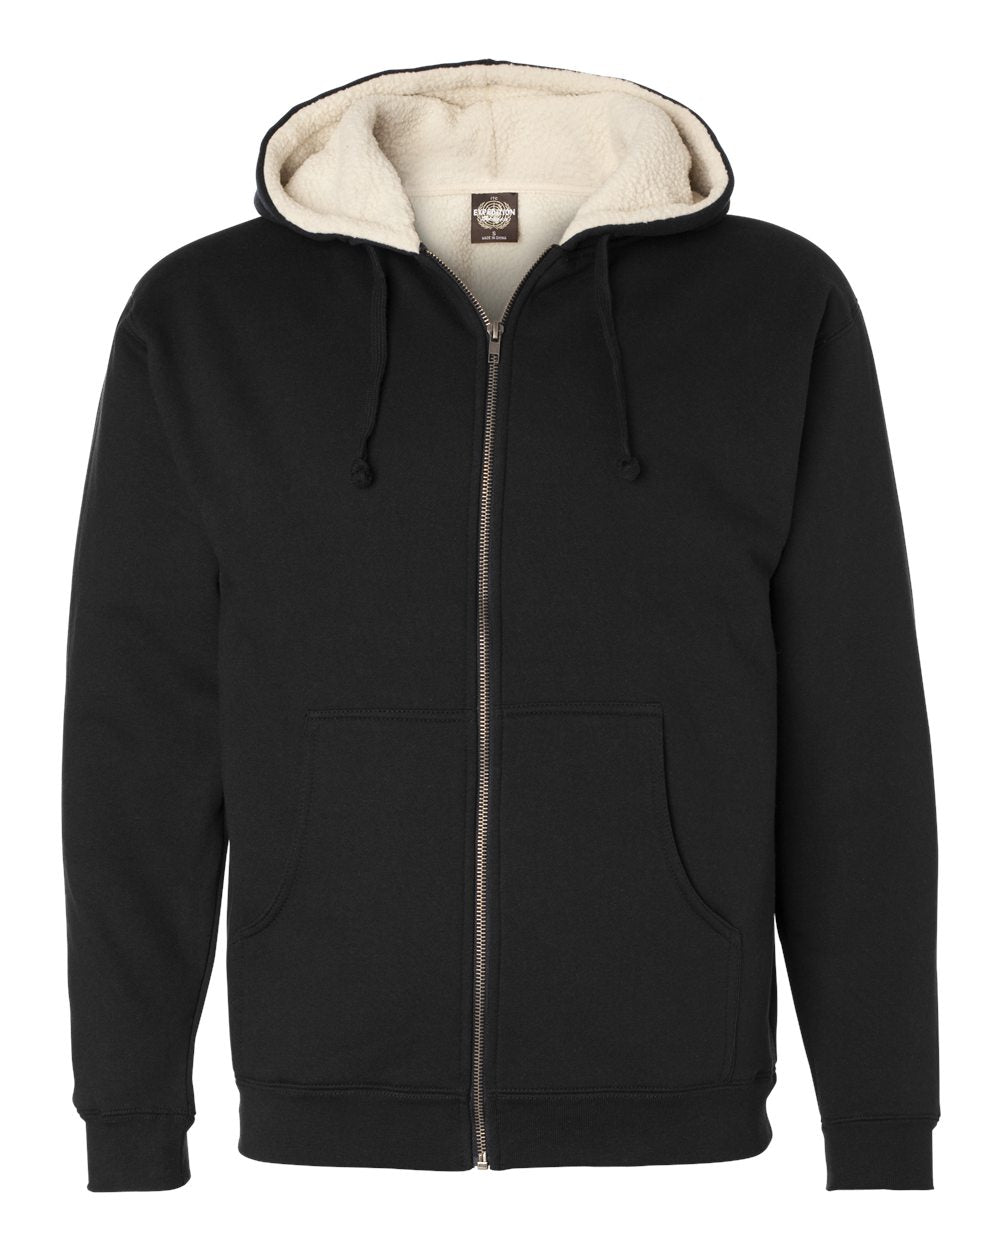 Independent Trading Co. - Sherpa-Lined Full-Zip Hooded Sweatshirt